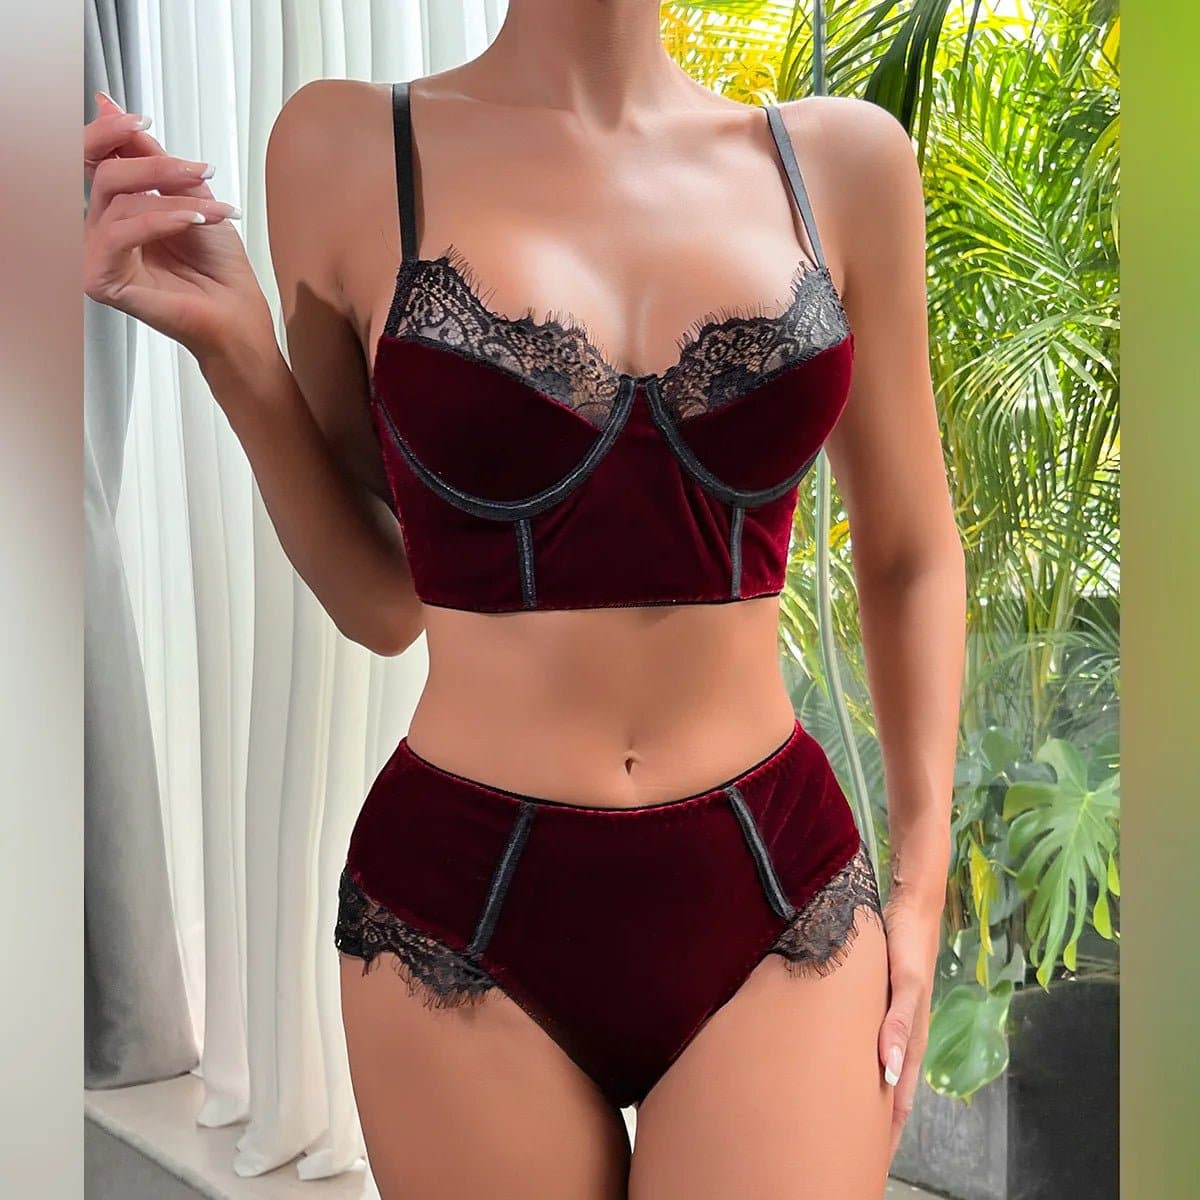 Velvet Lingerie Intimate Set with Lace - Sexy Underwire Bra & Briefs - Wandering Woman